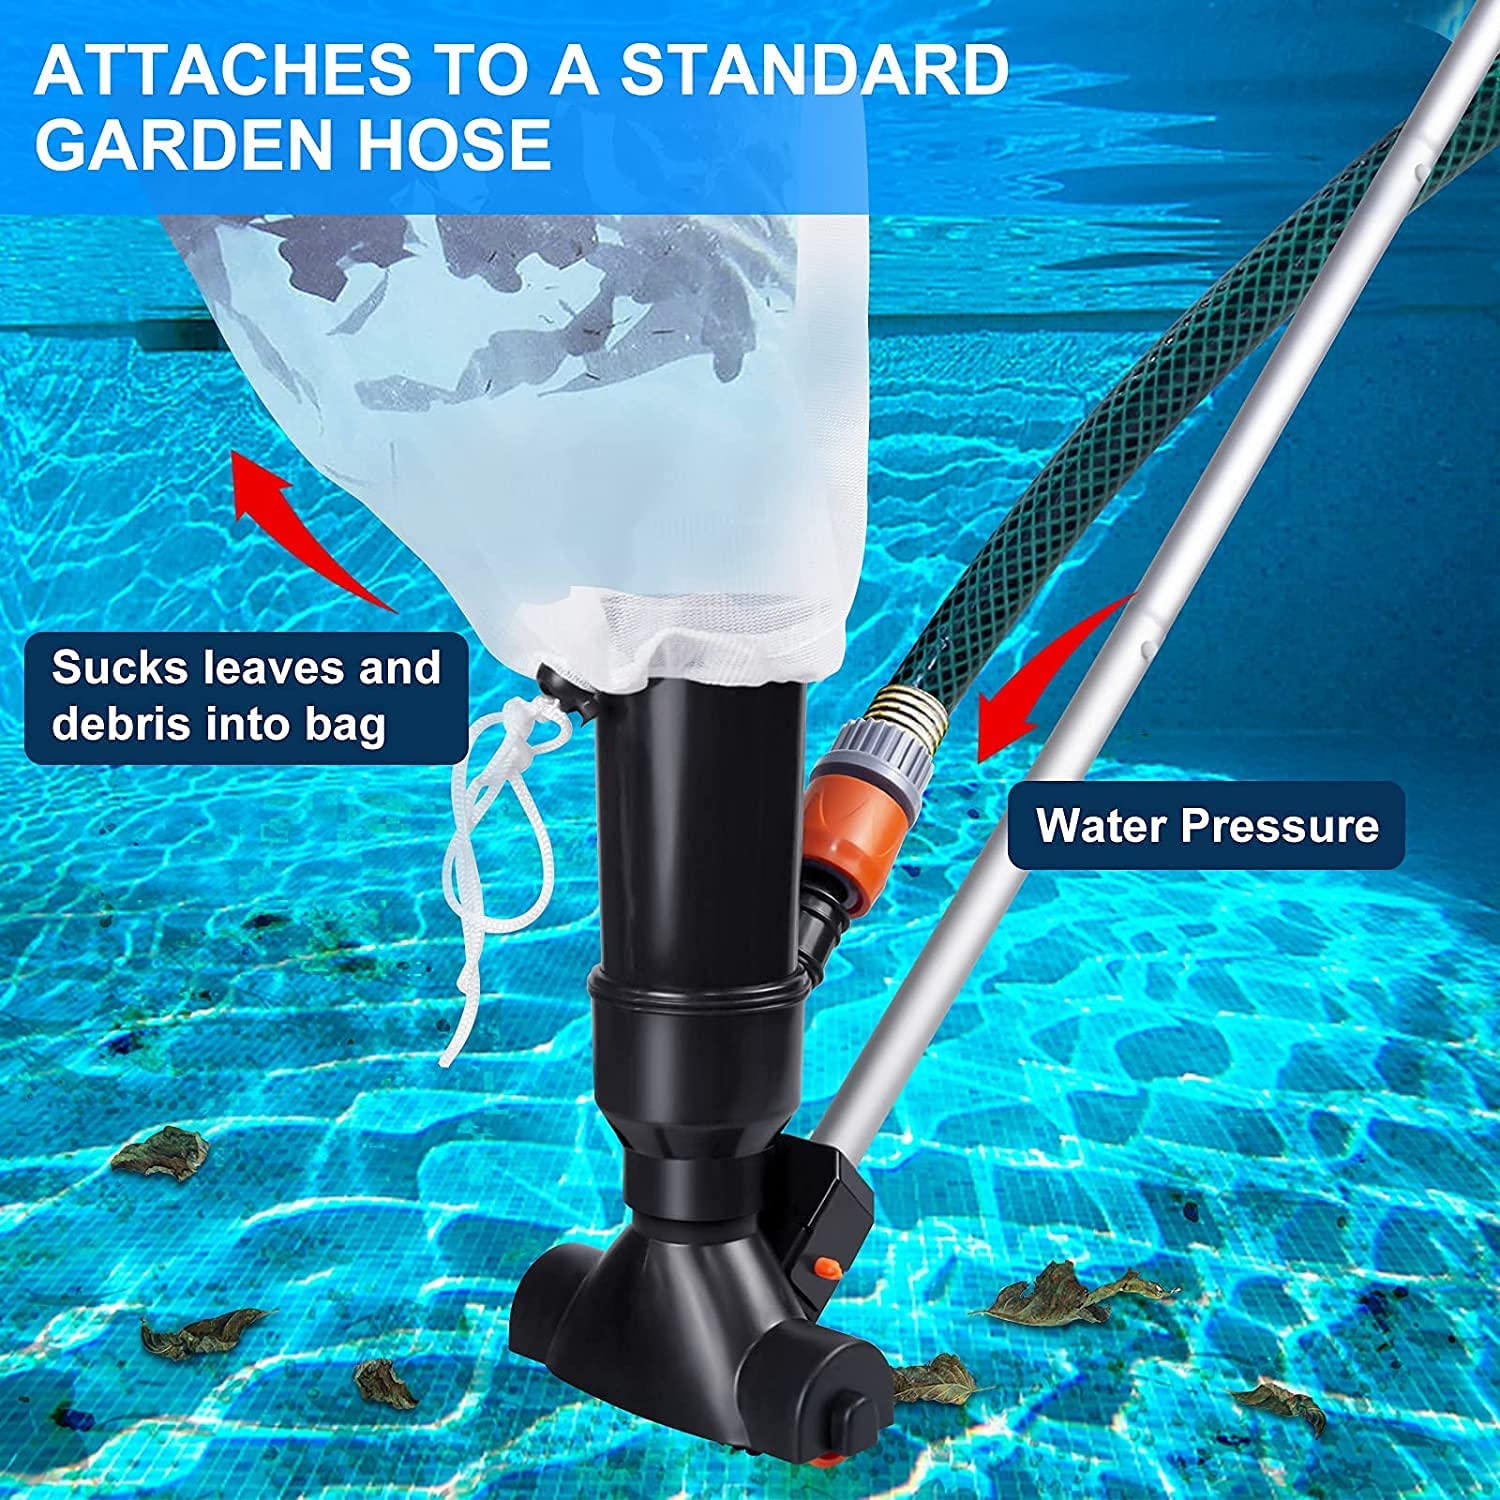 S-Union Portable Swimming Pool Jet Vacuum Cleaner Underwater with 5 Section Pole and Mesh Bag, Pool Mini Jet Vacuum Suction Head for Above Ground Pool Spas Hot Tub Ponds & Fountains - Attaches to Garden Hose